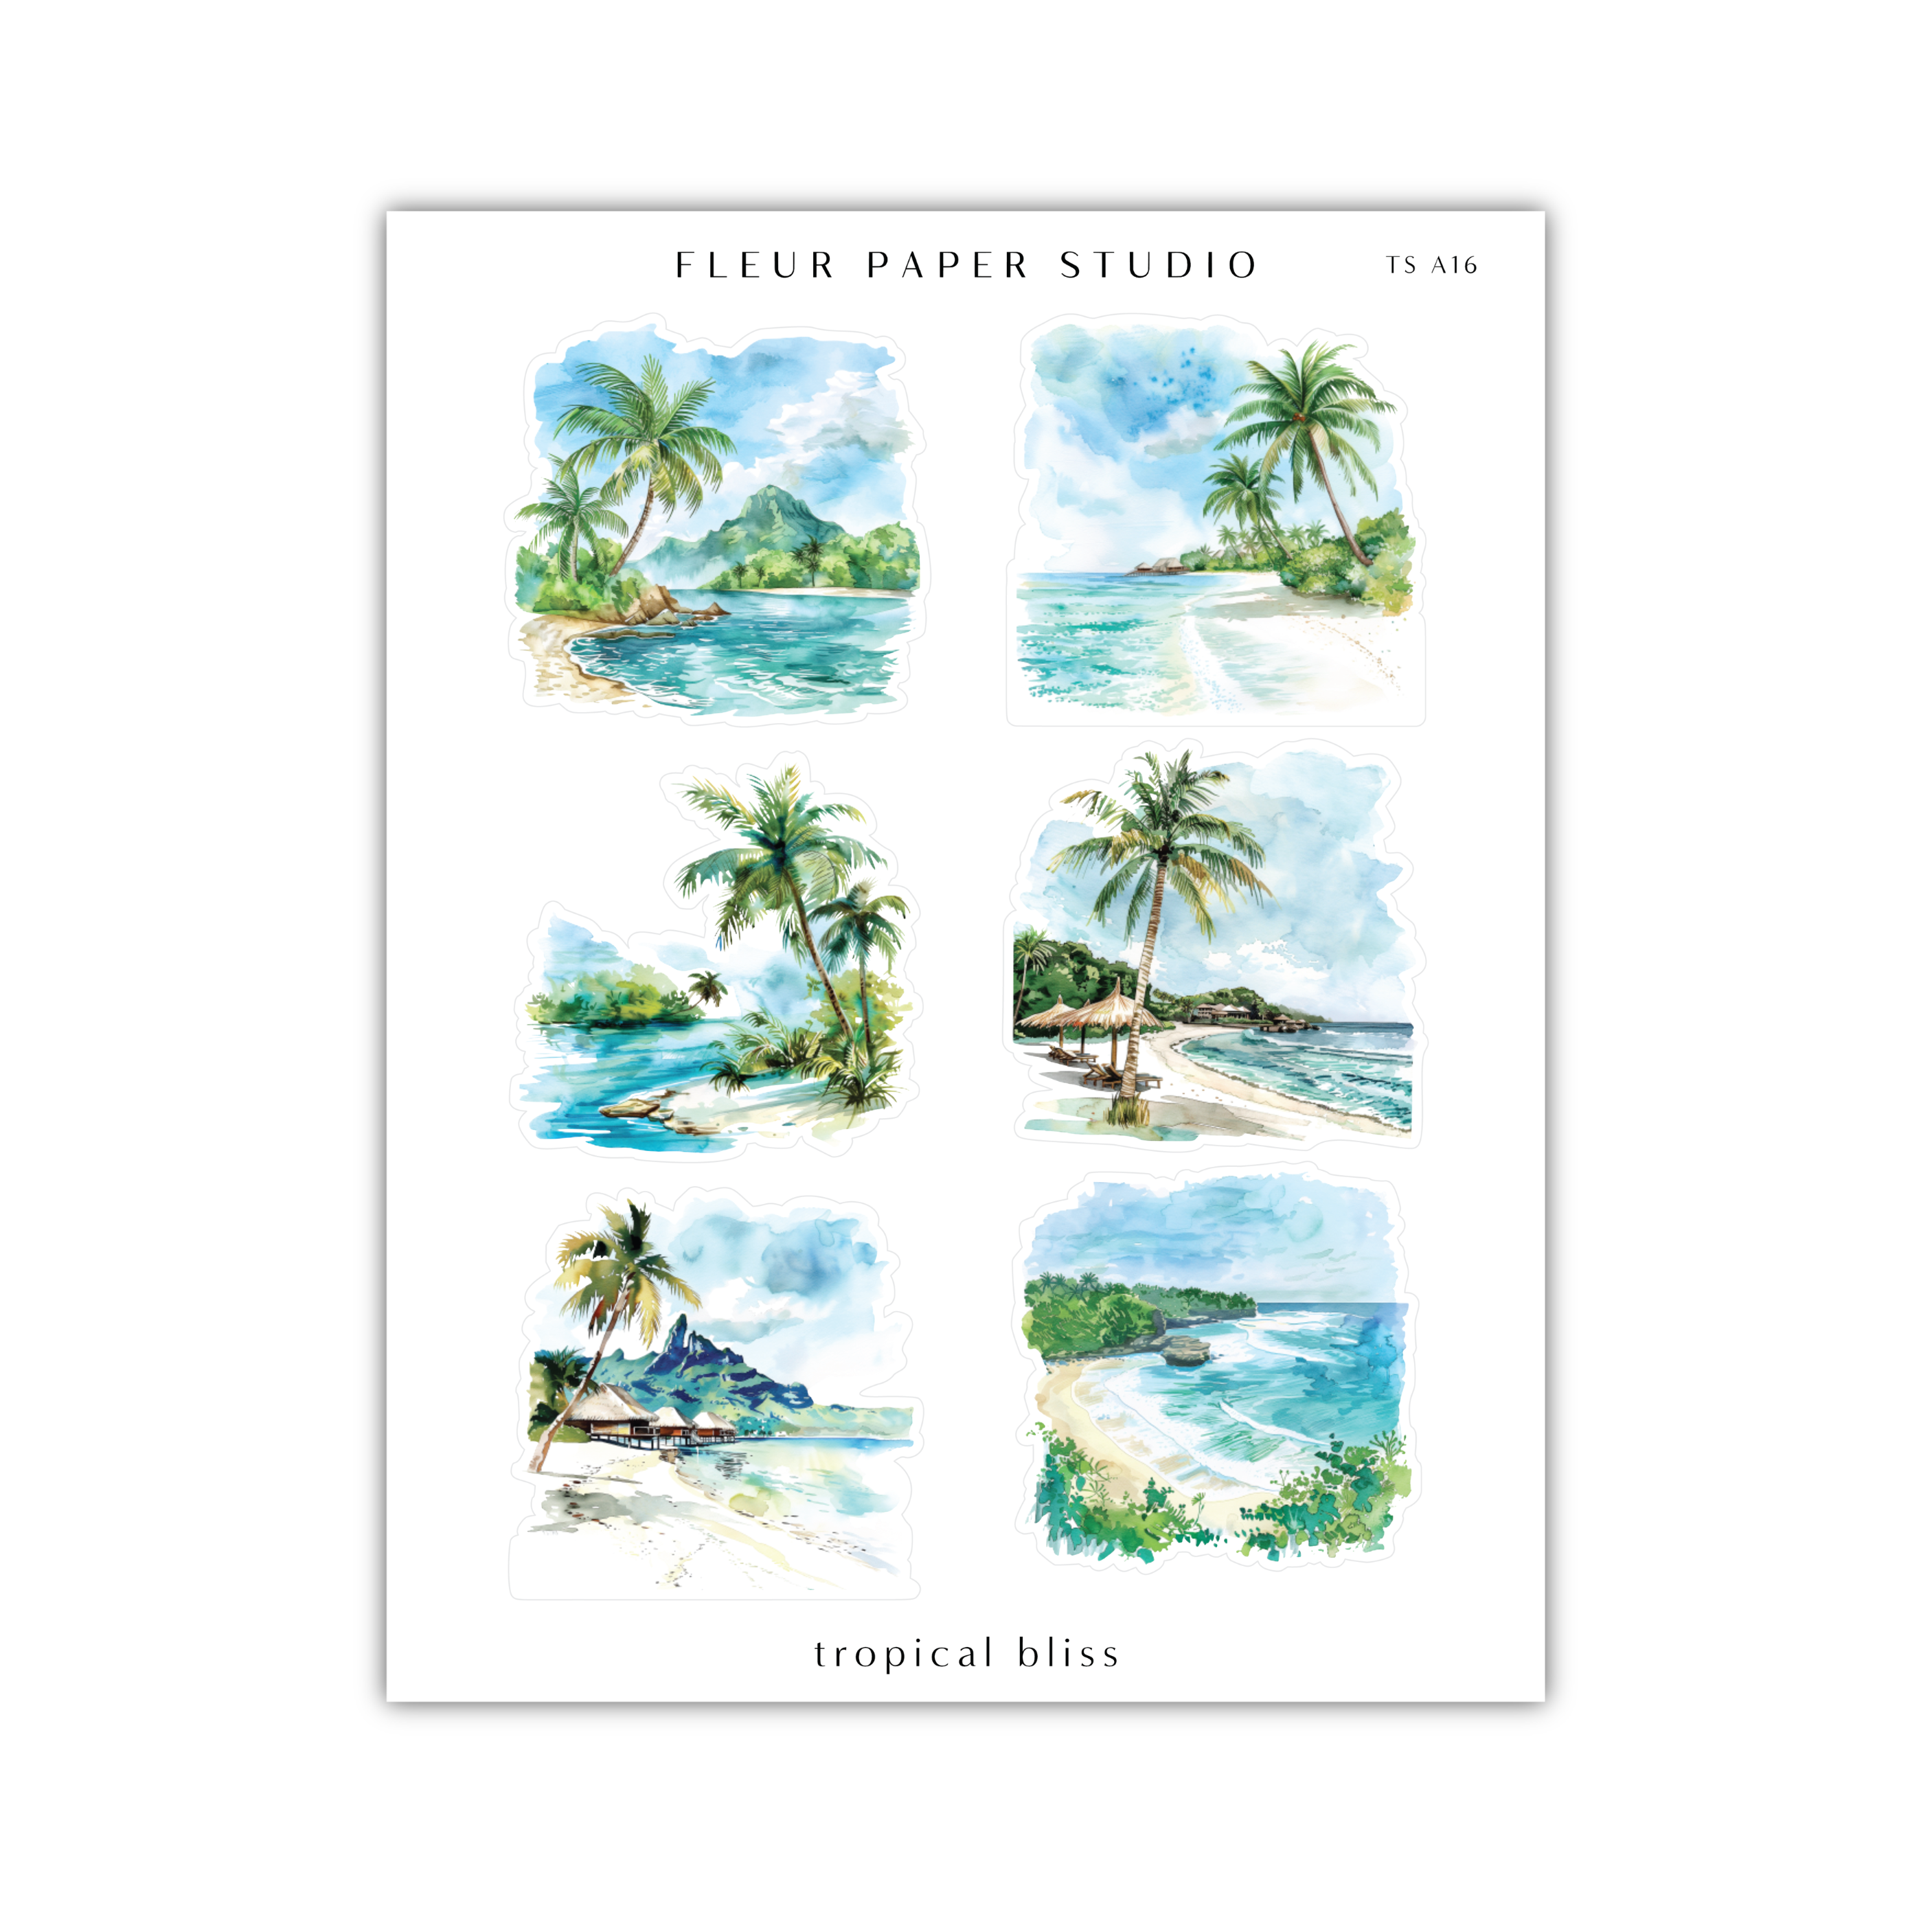 a watercolor painting of a tropical island